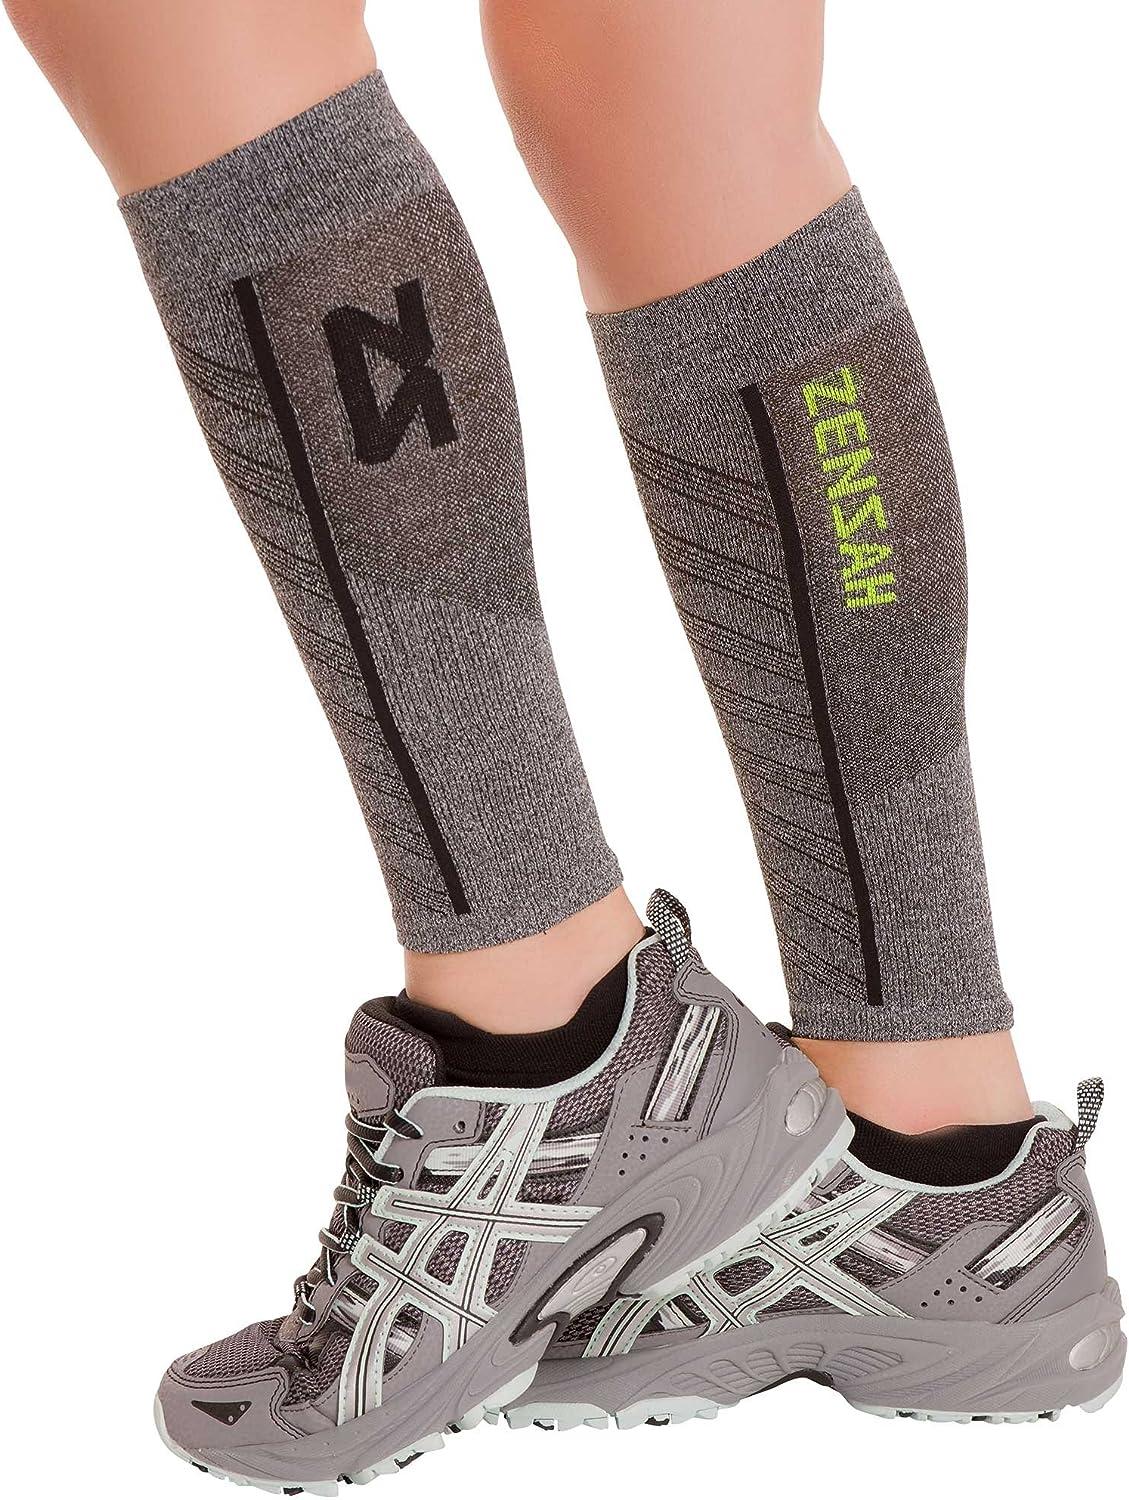 Run Longer and Safer with Zensah Compression Gear